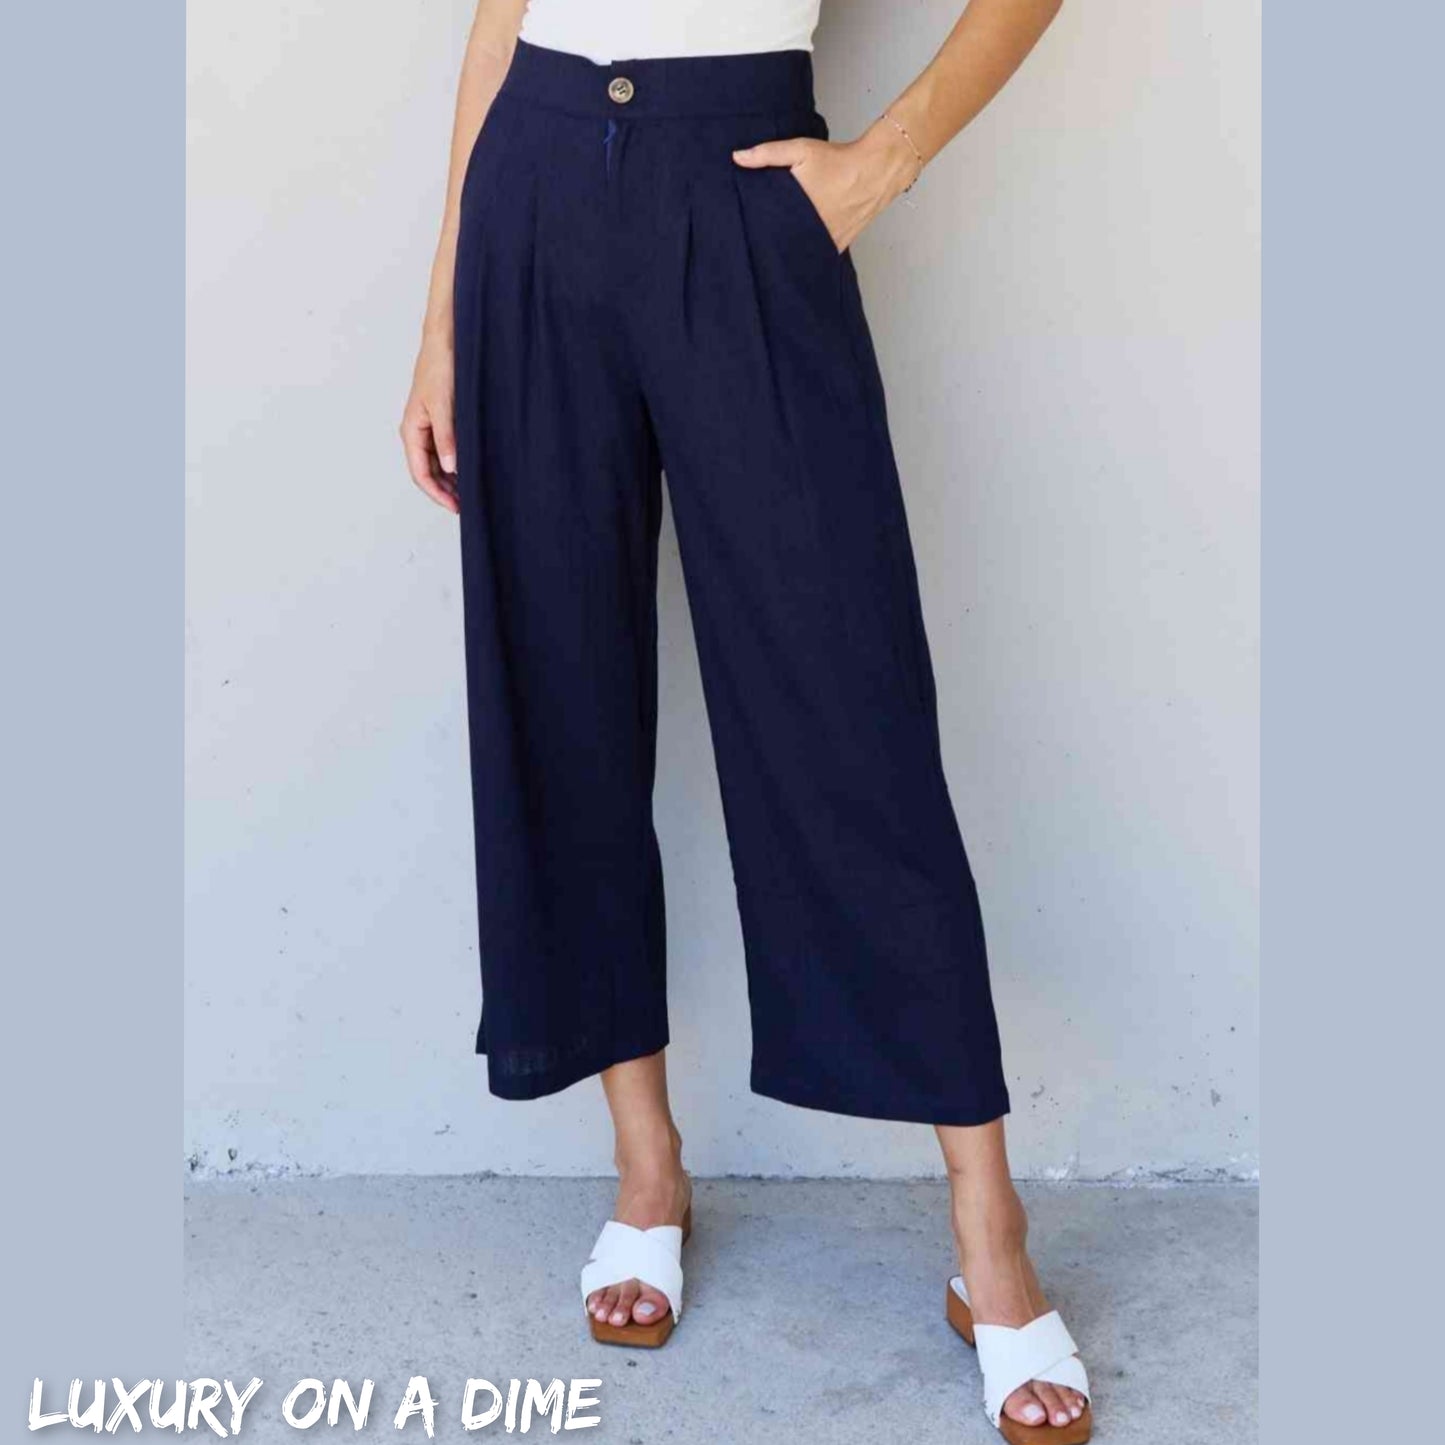 Pleated Button Front Linen Blend Slacks Business Casual Pants by And The Why